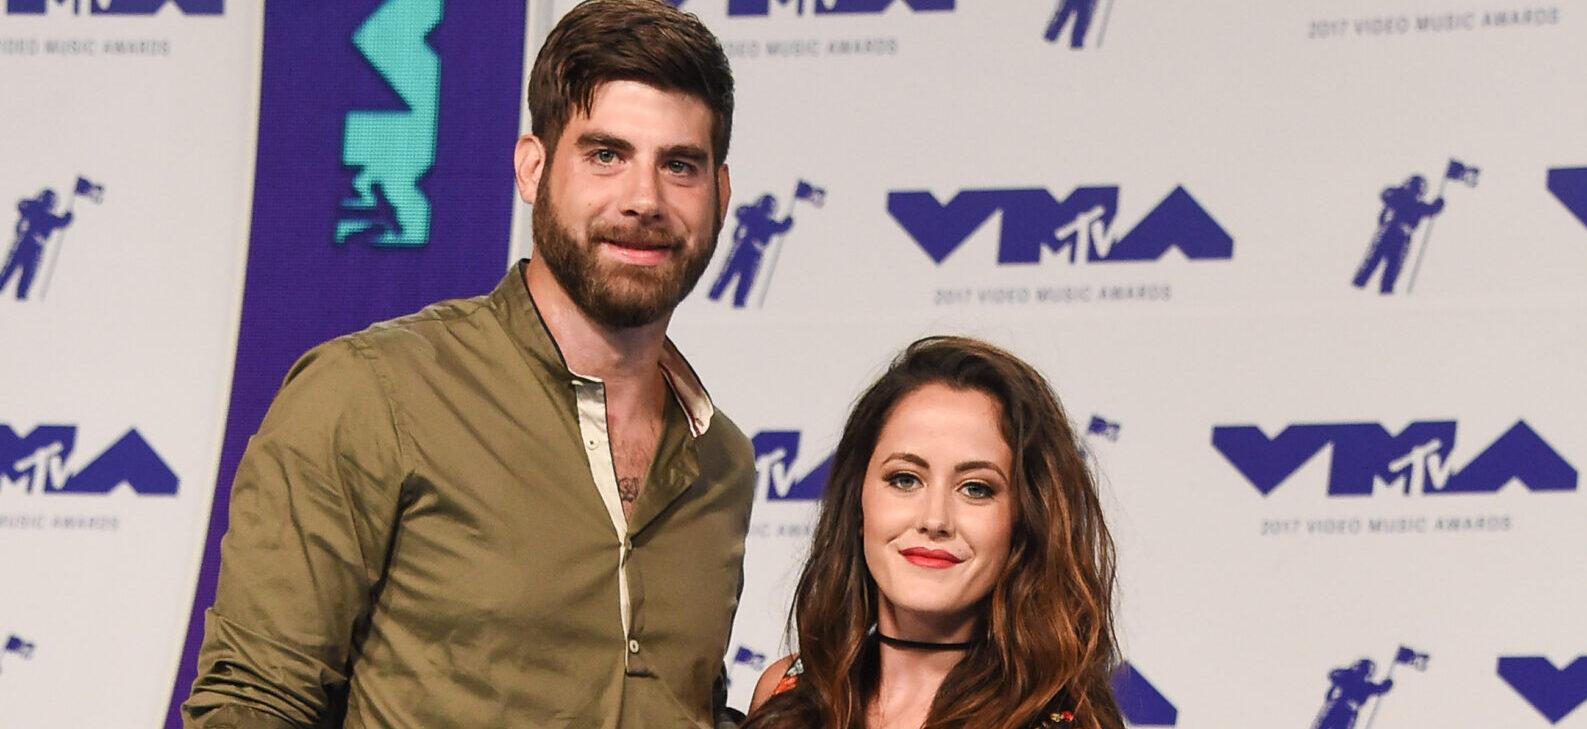 ‘Teen Mom’ Jenelle Evans Breaks Silence On Husband’s Child Abuse Charge: ‘You Can’t Trust Cops’